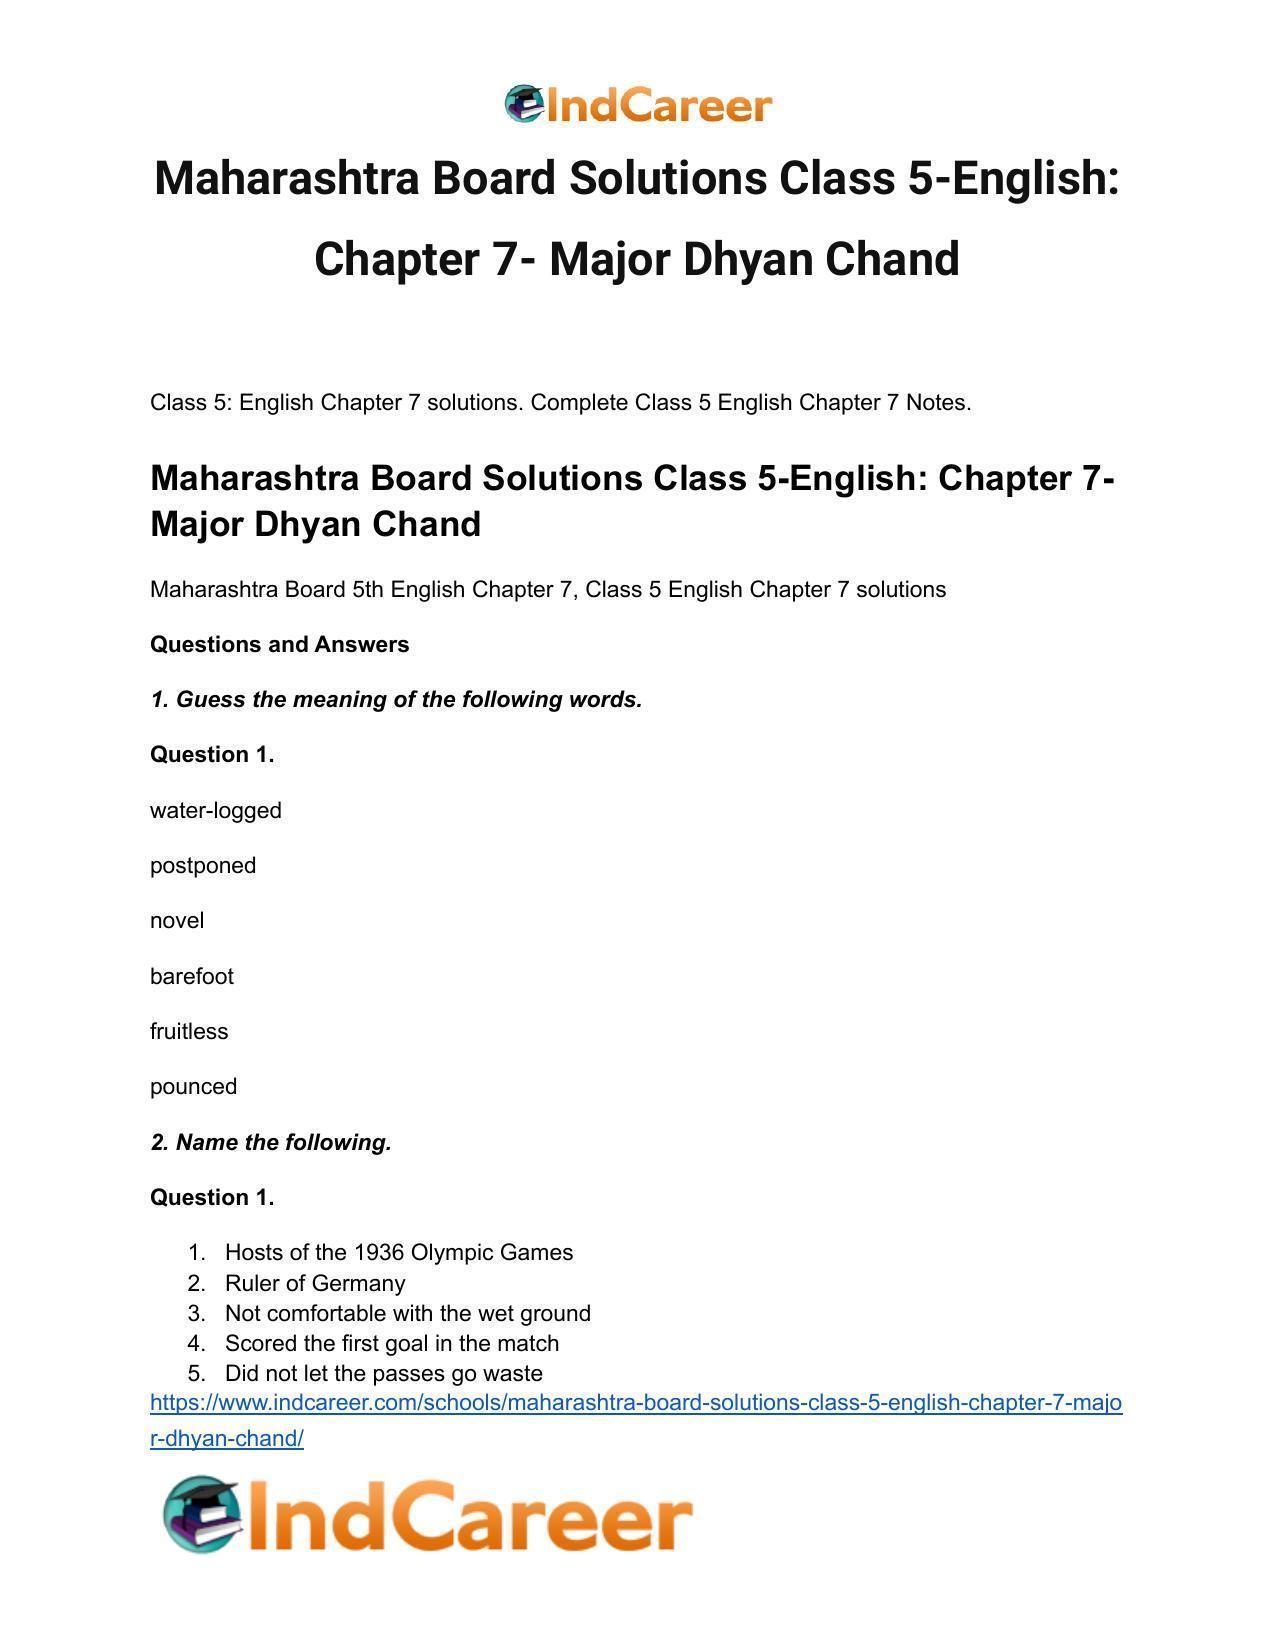 Maharashtra Board Solutions Class 5-English: Chapter 7- Major Dhyan Chand - Page 2